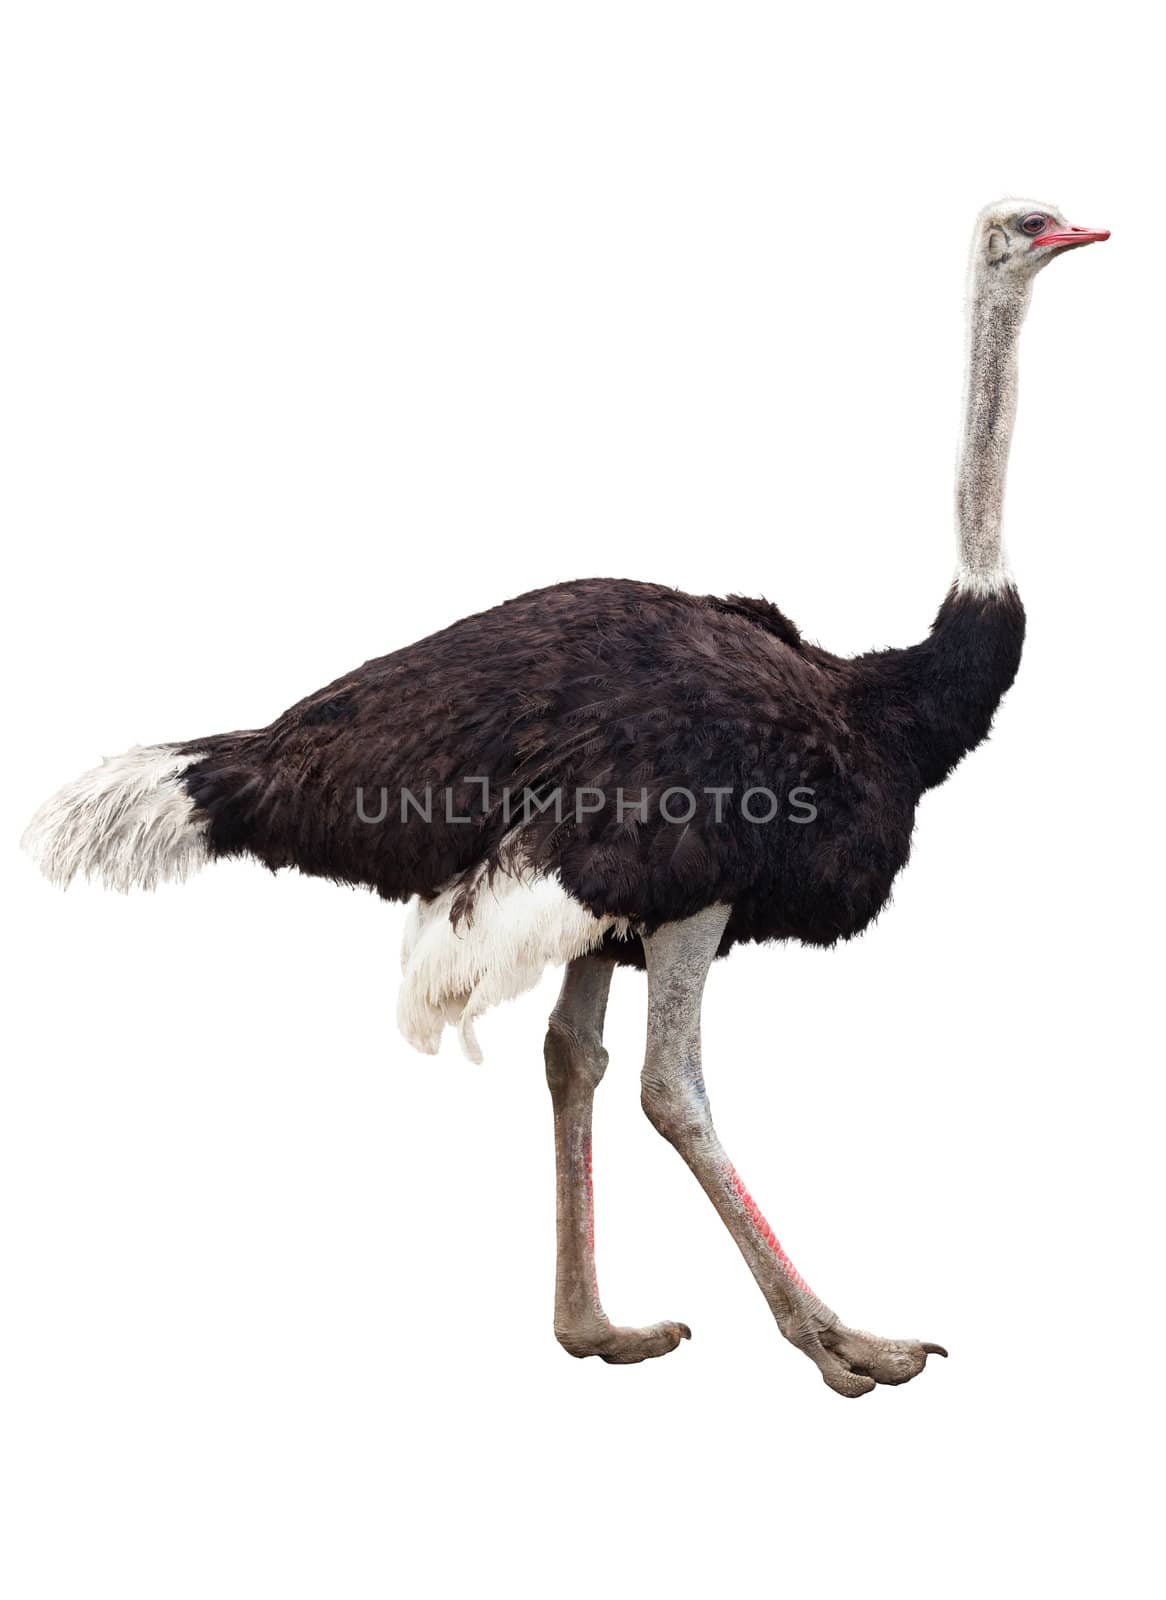 Image of the ostrich isolated on white